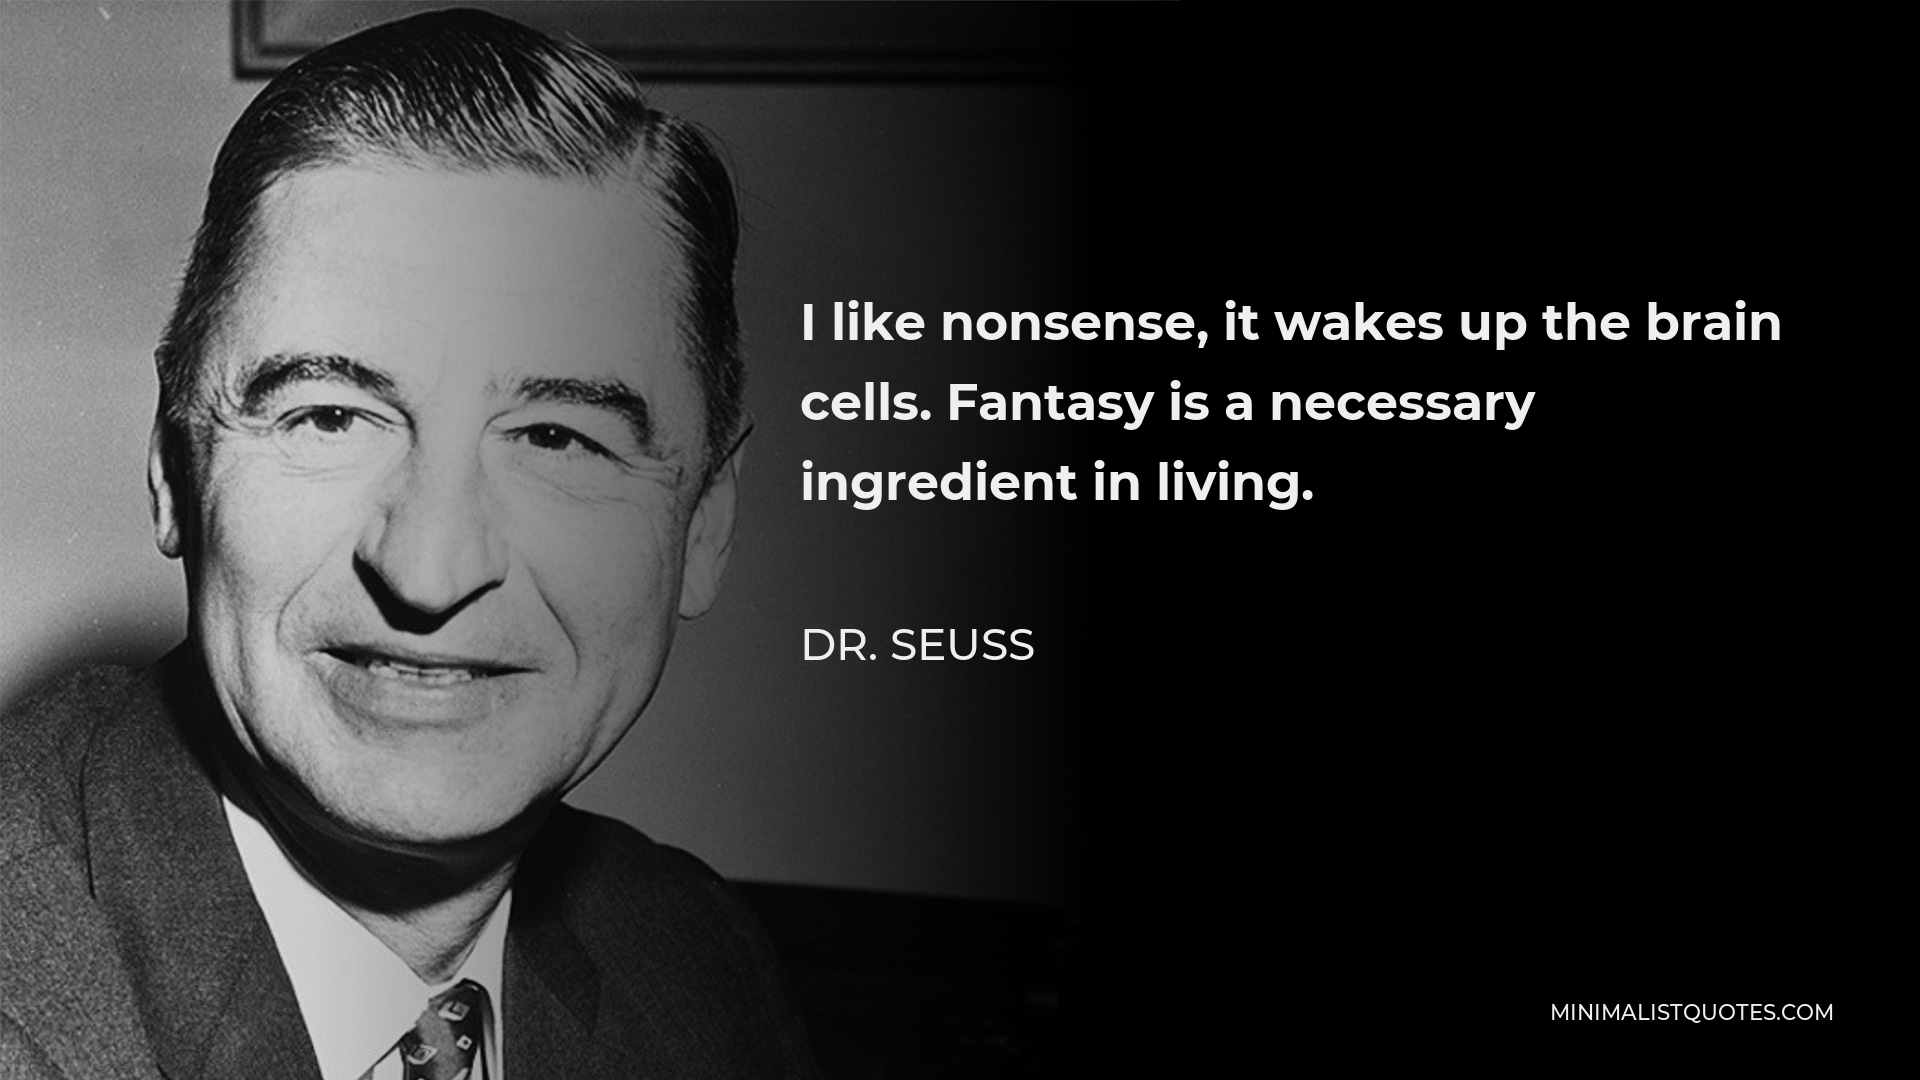 Dr. Seuss Quote - I like nonsense, it wakes up the brain cells. Fantasy is a necessary ingredient in living.